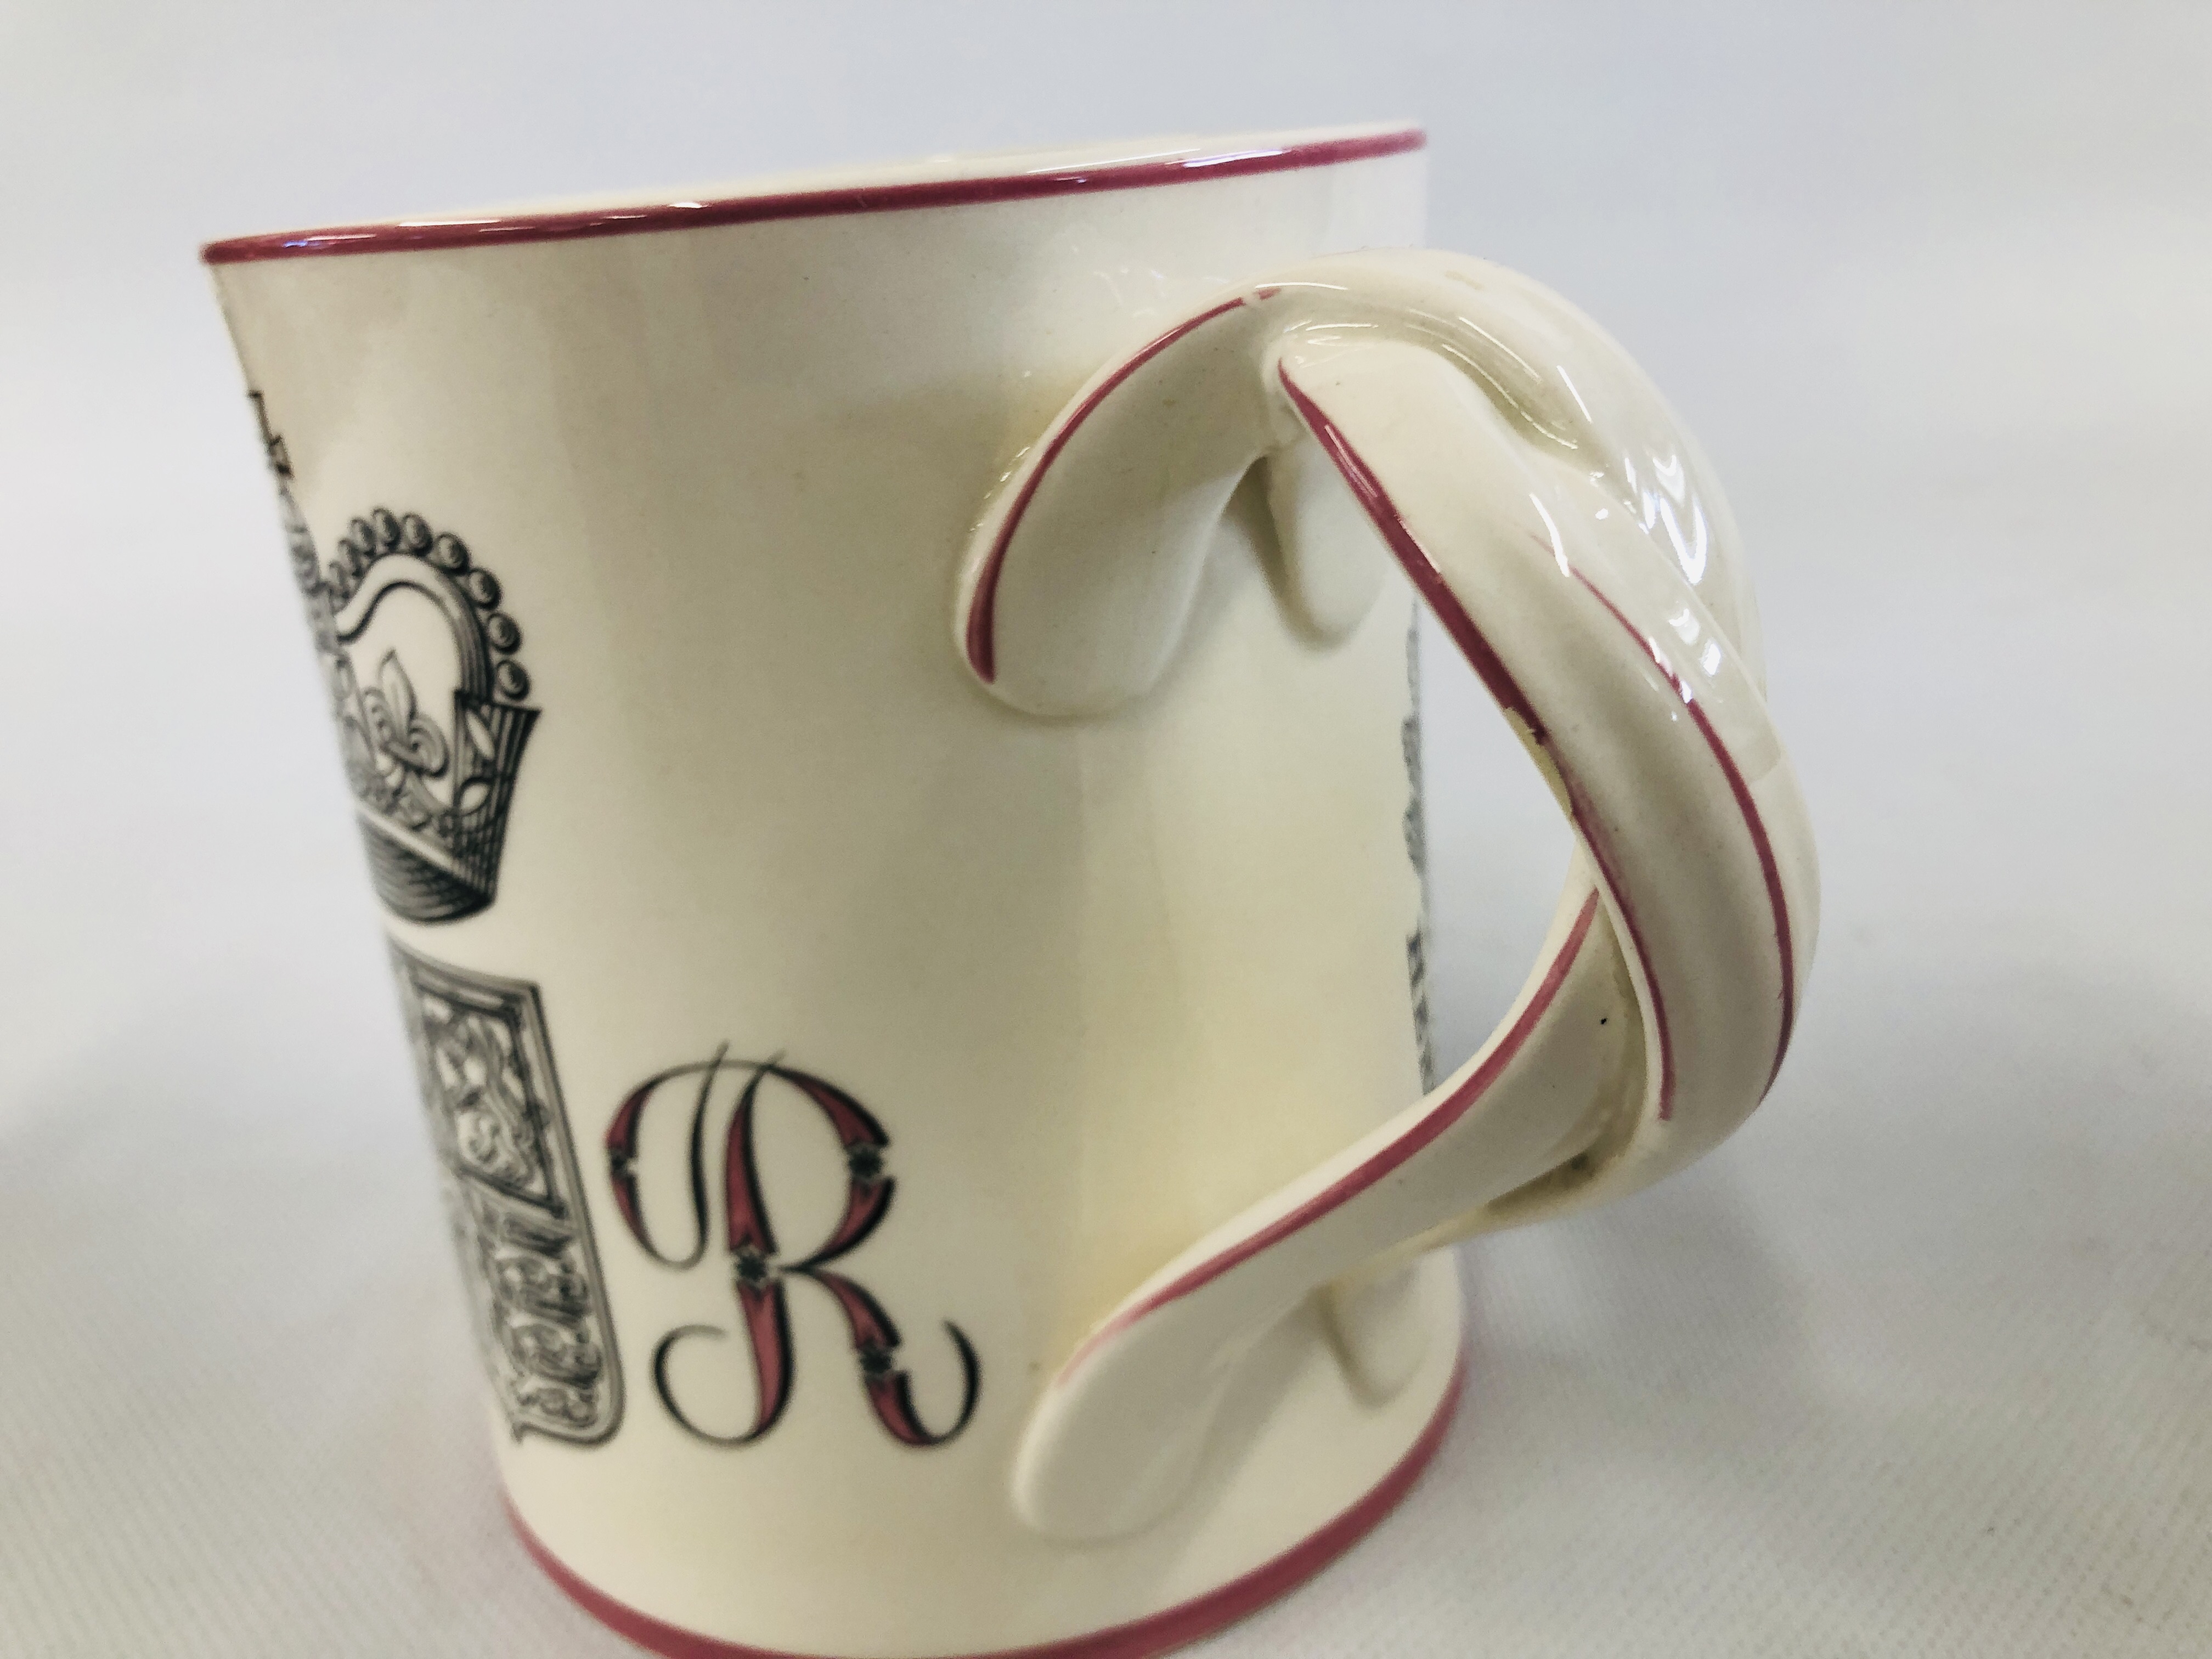 A VINTAGE ROYAL DOULTON TWO HANDLED MUG "MADE FOR COURAGE AND COMPANY LIMITED LONDON" DESIGNED BY - Image 6 of 7